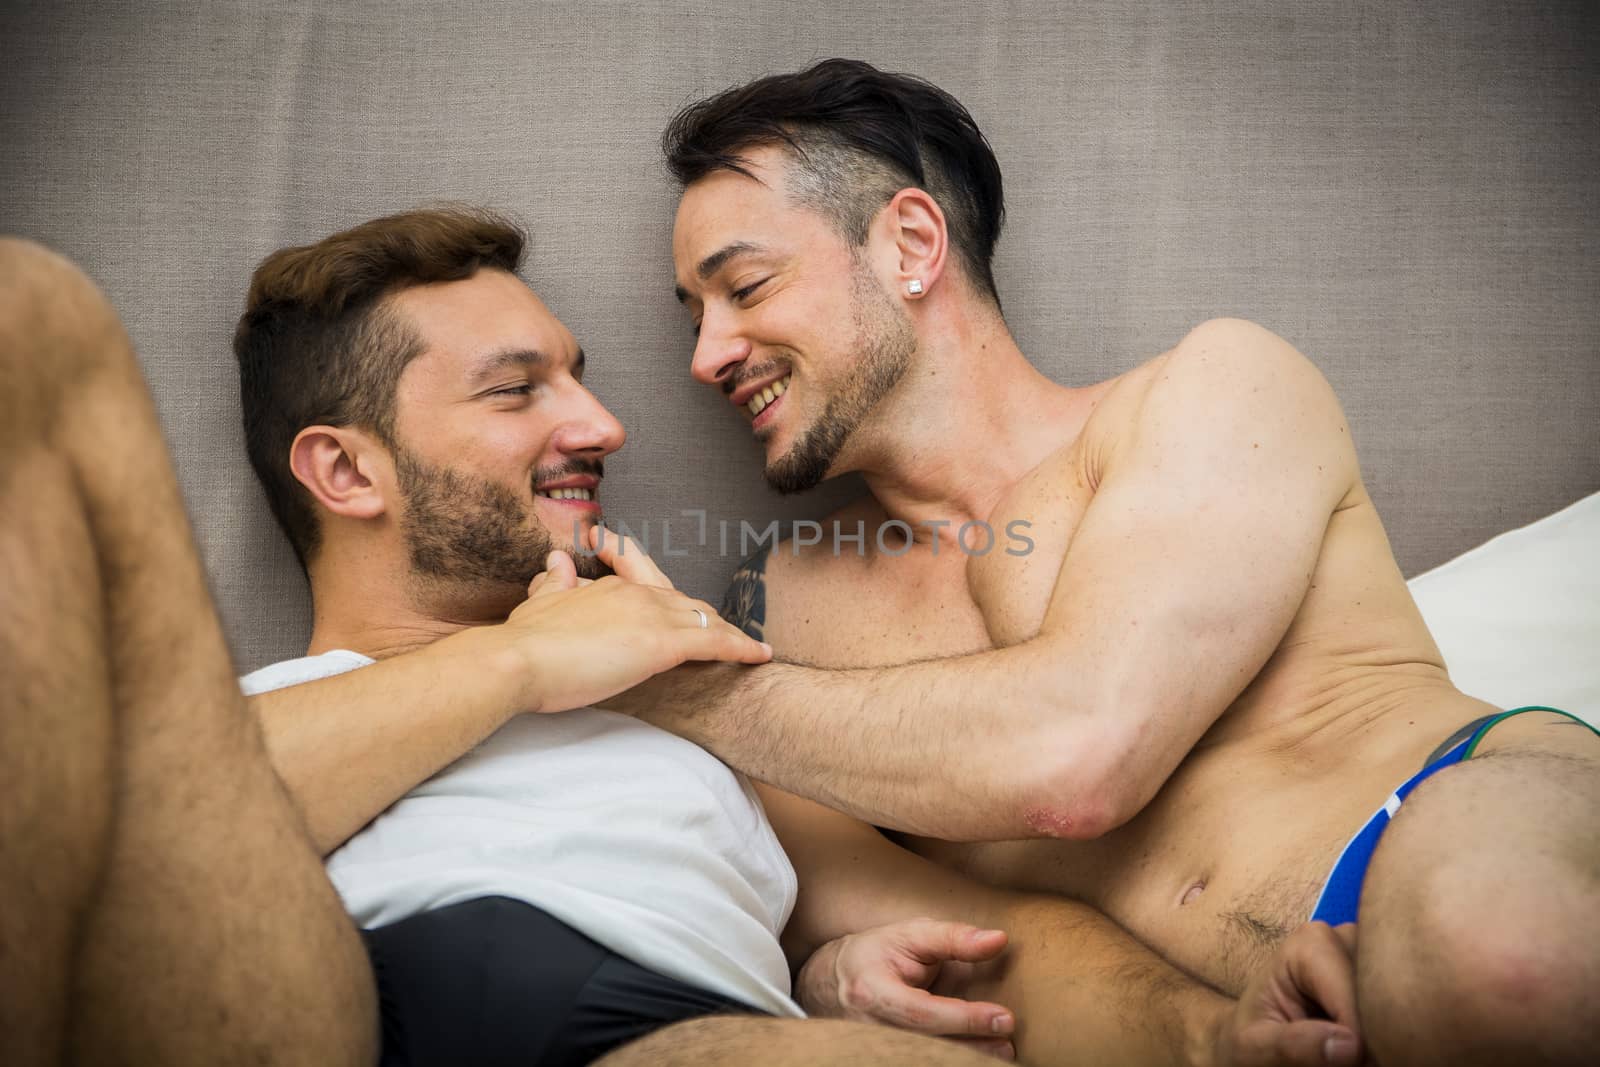 Gay couple in bed by artofphoto